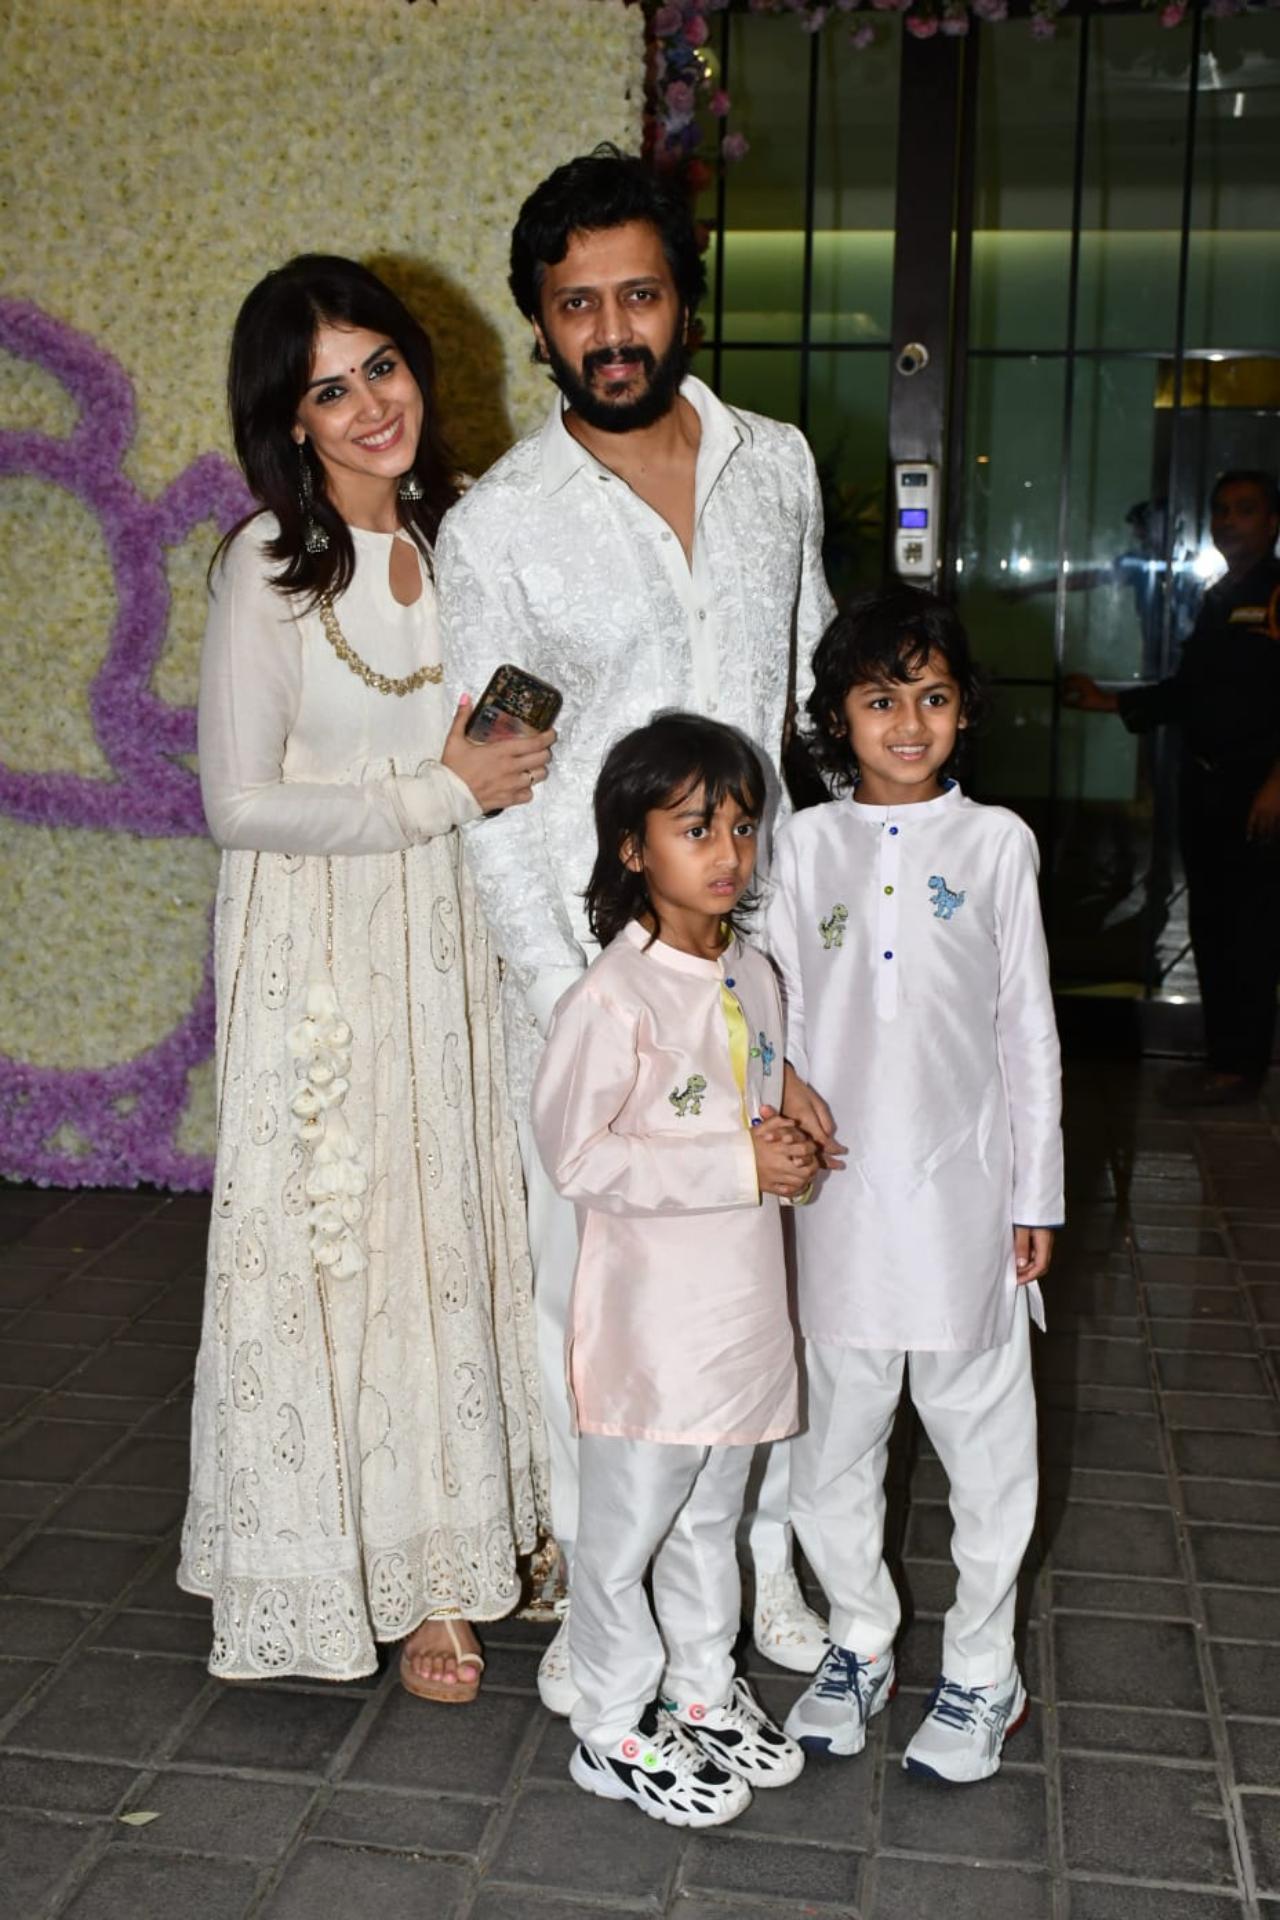 Riteish Deshmukh and Genelia Deshmukh arrived together with their kids. The family matched their outfits as they all wore white and posed for the paparazzi. The Deshmukhs arrived in their new swanky BMW